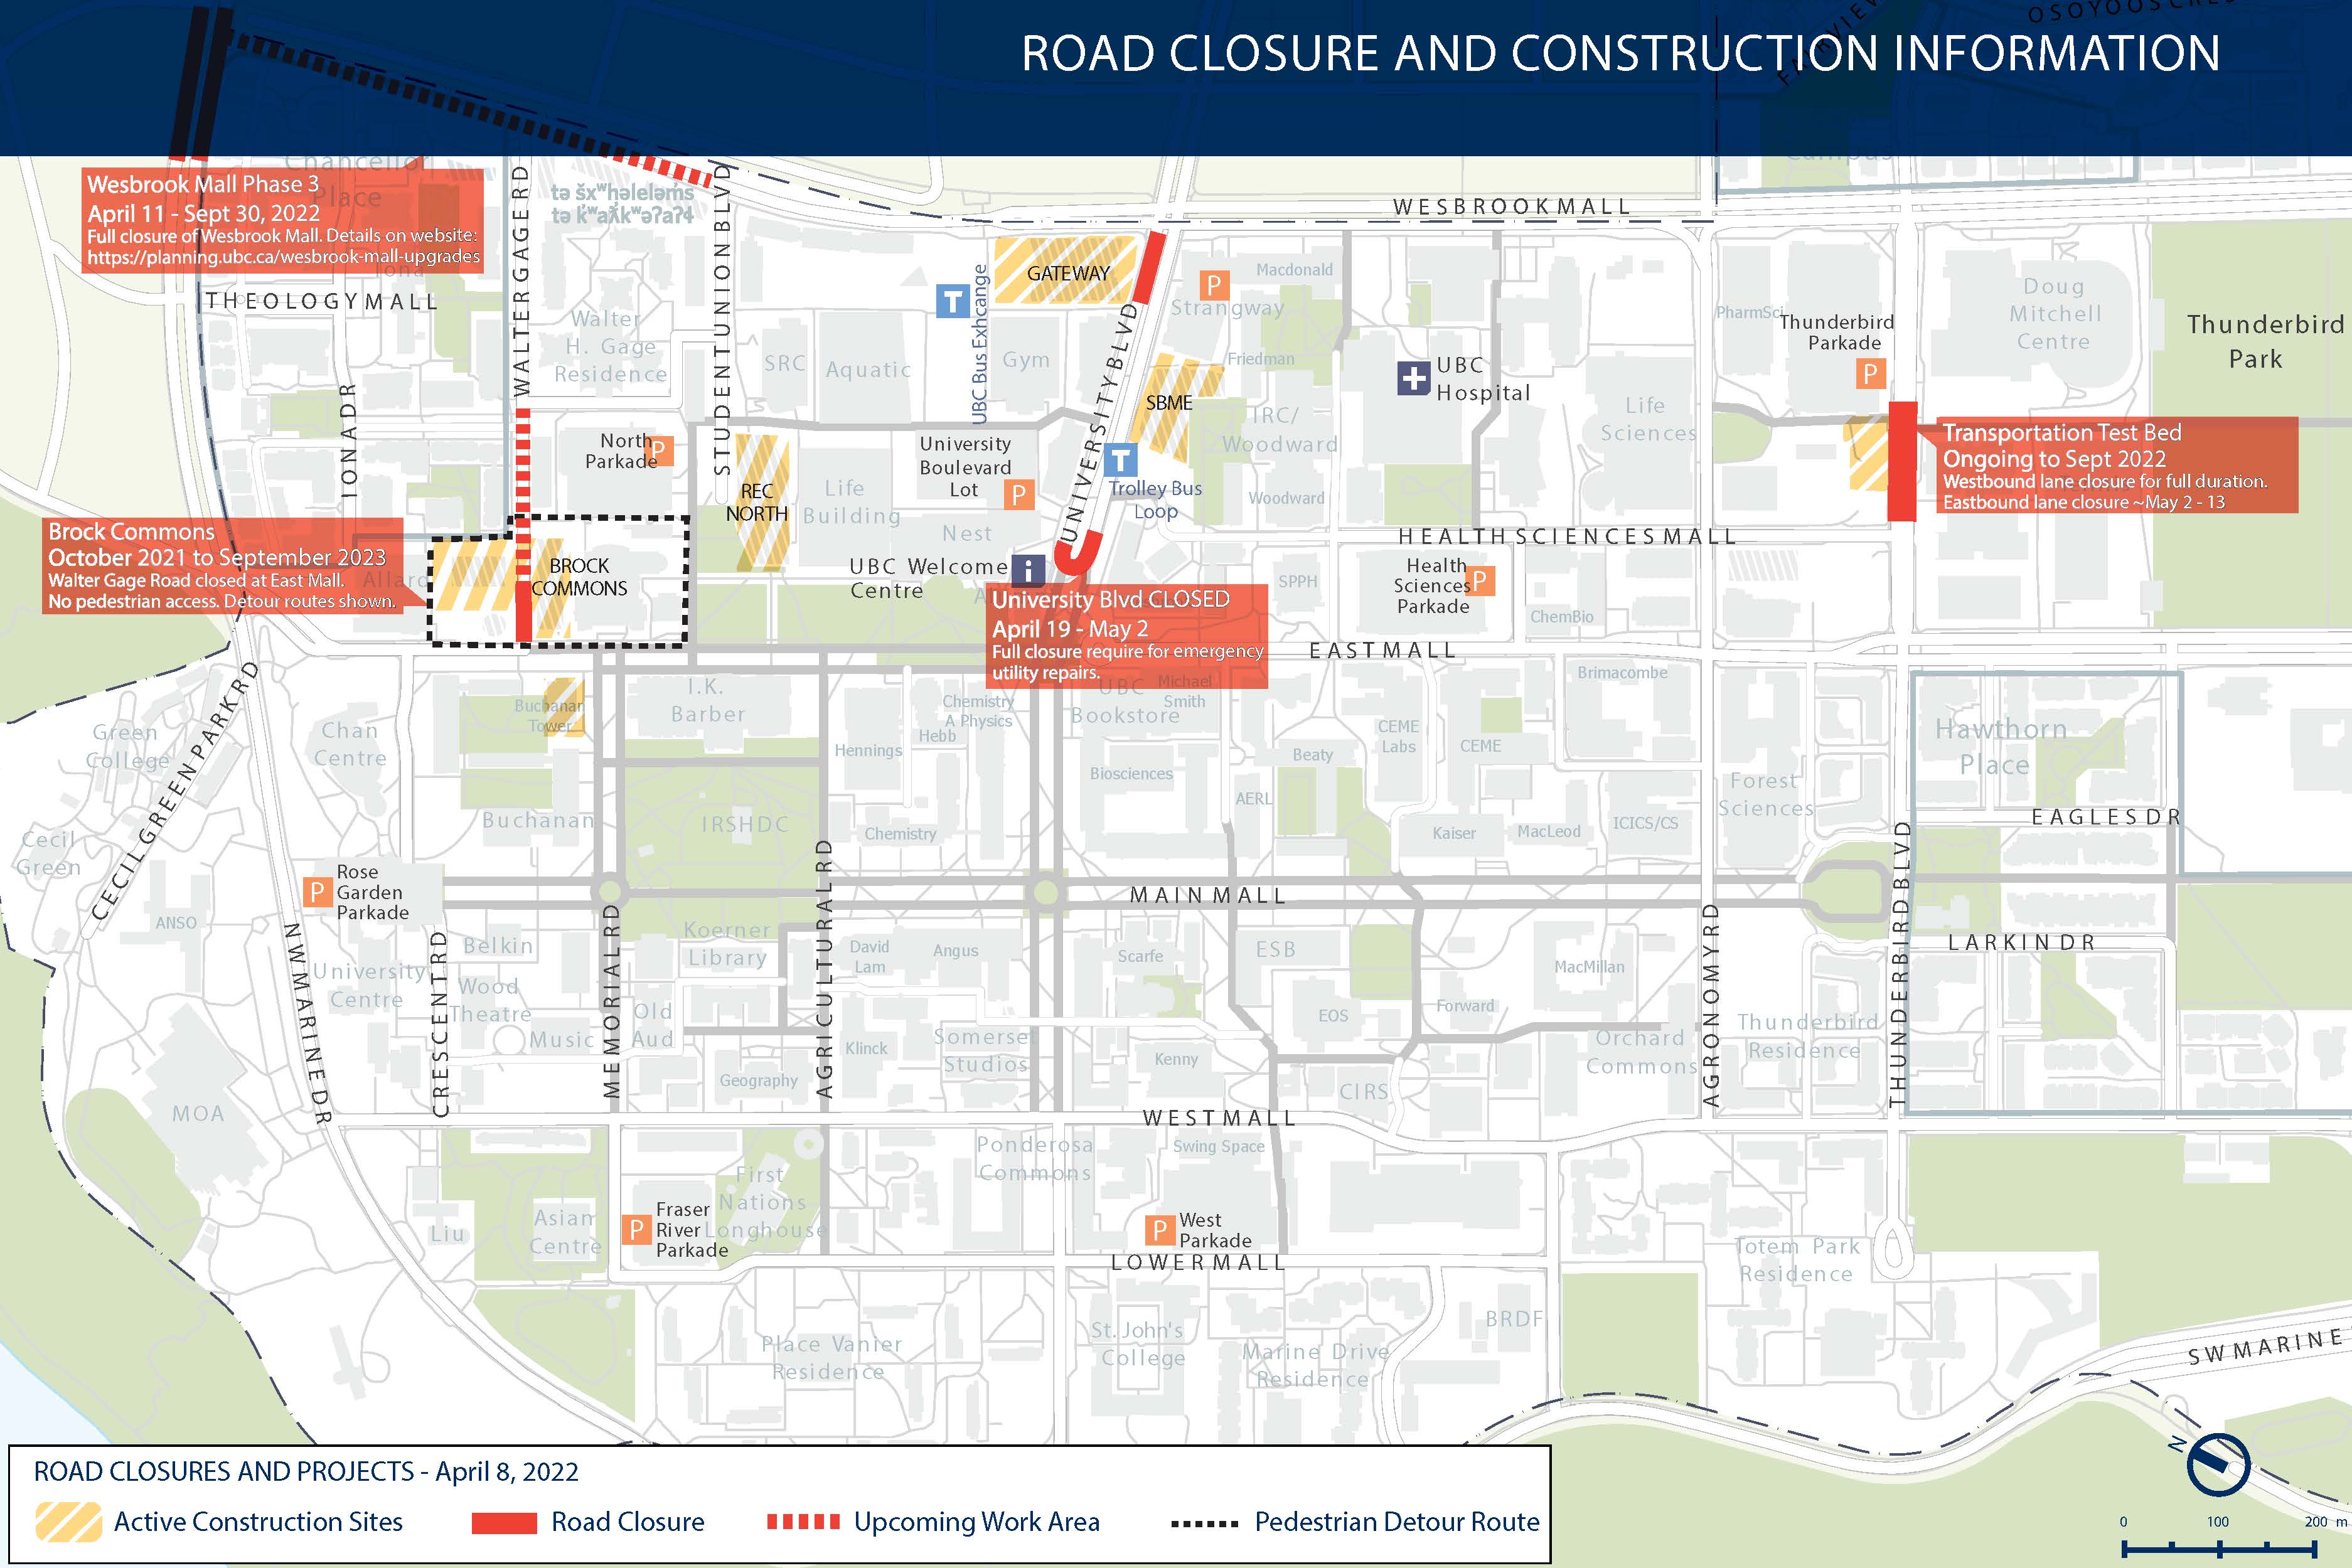 Road closures and projects as of April 8, 2022.